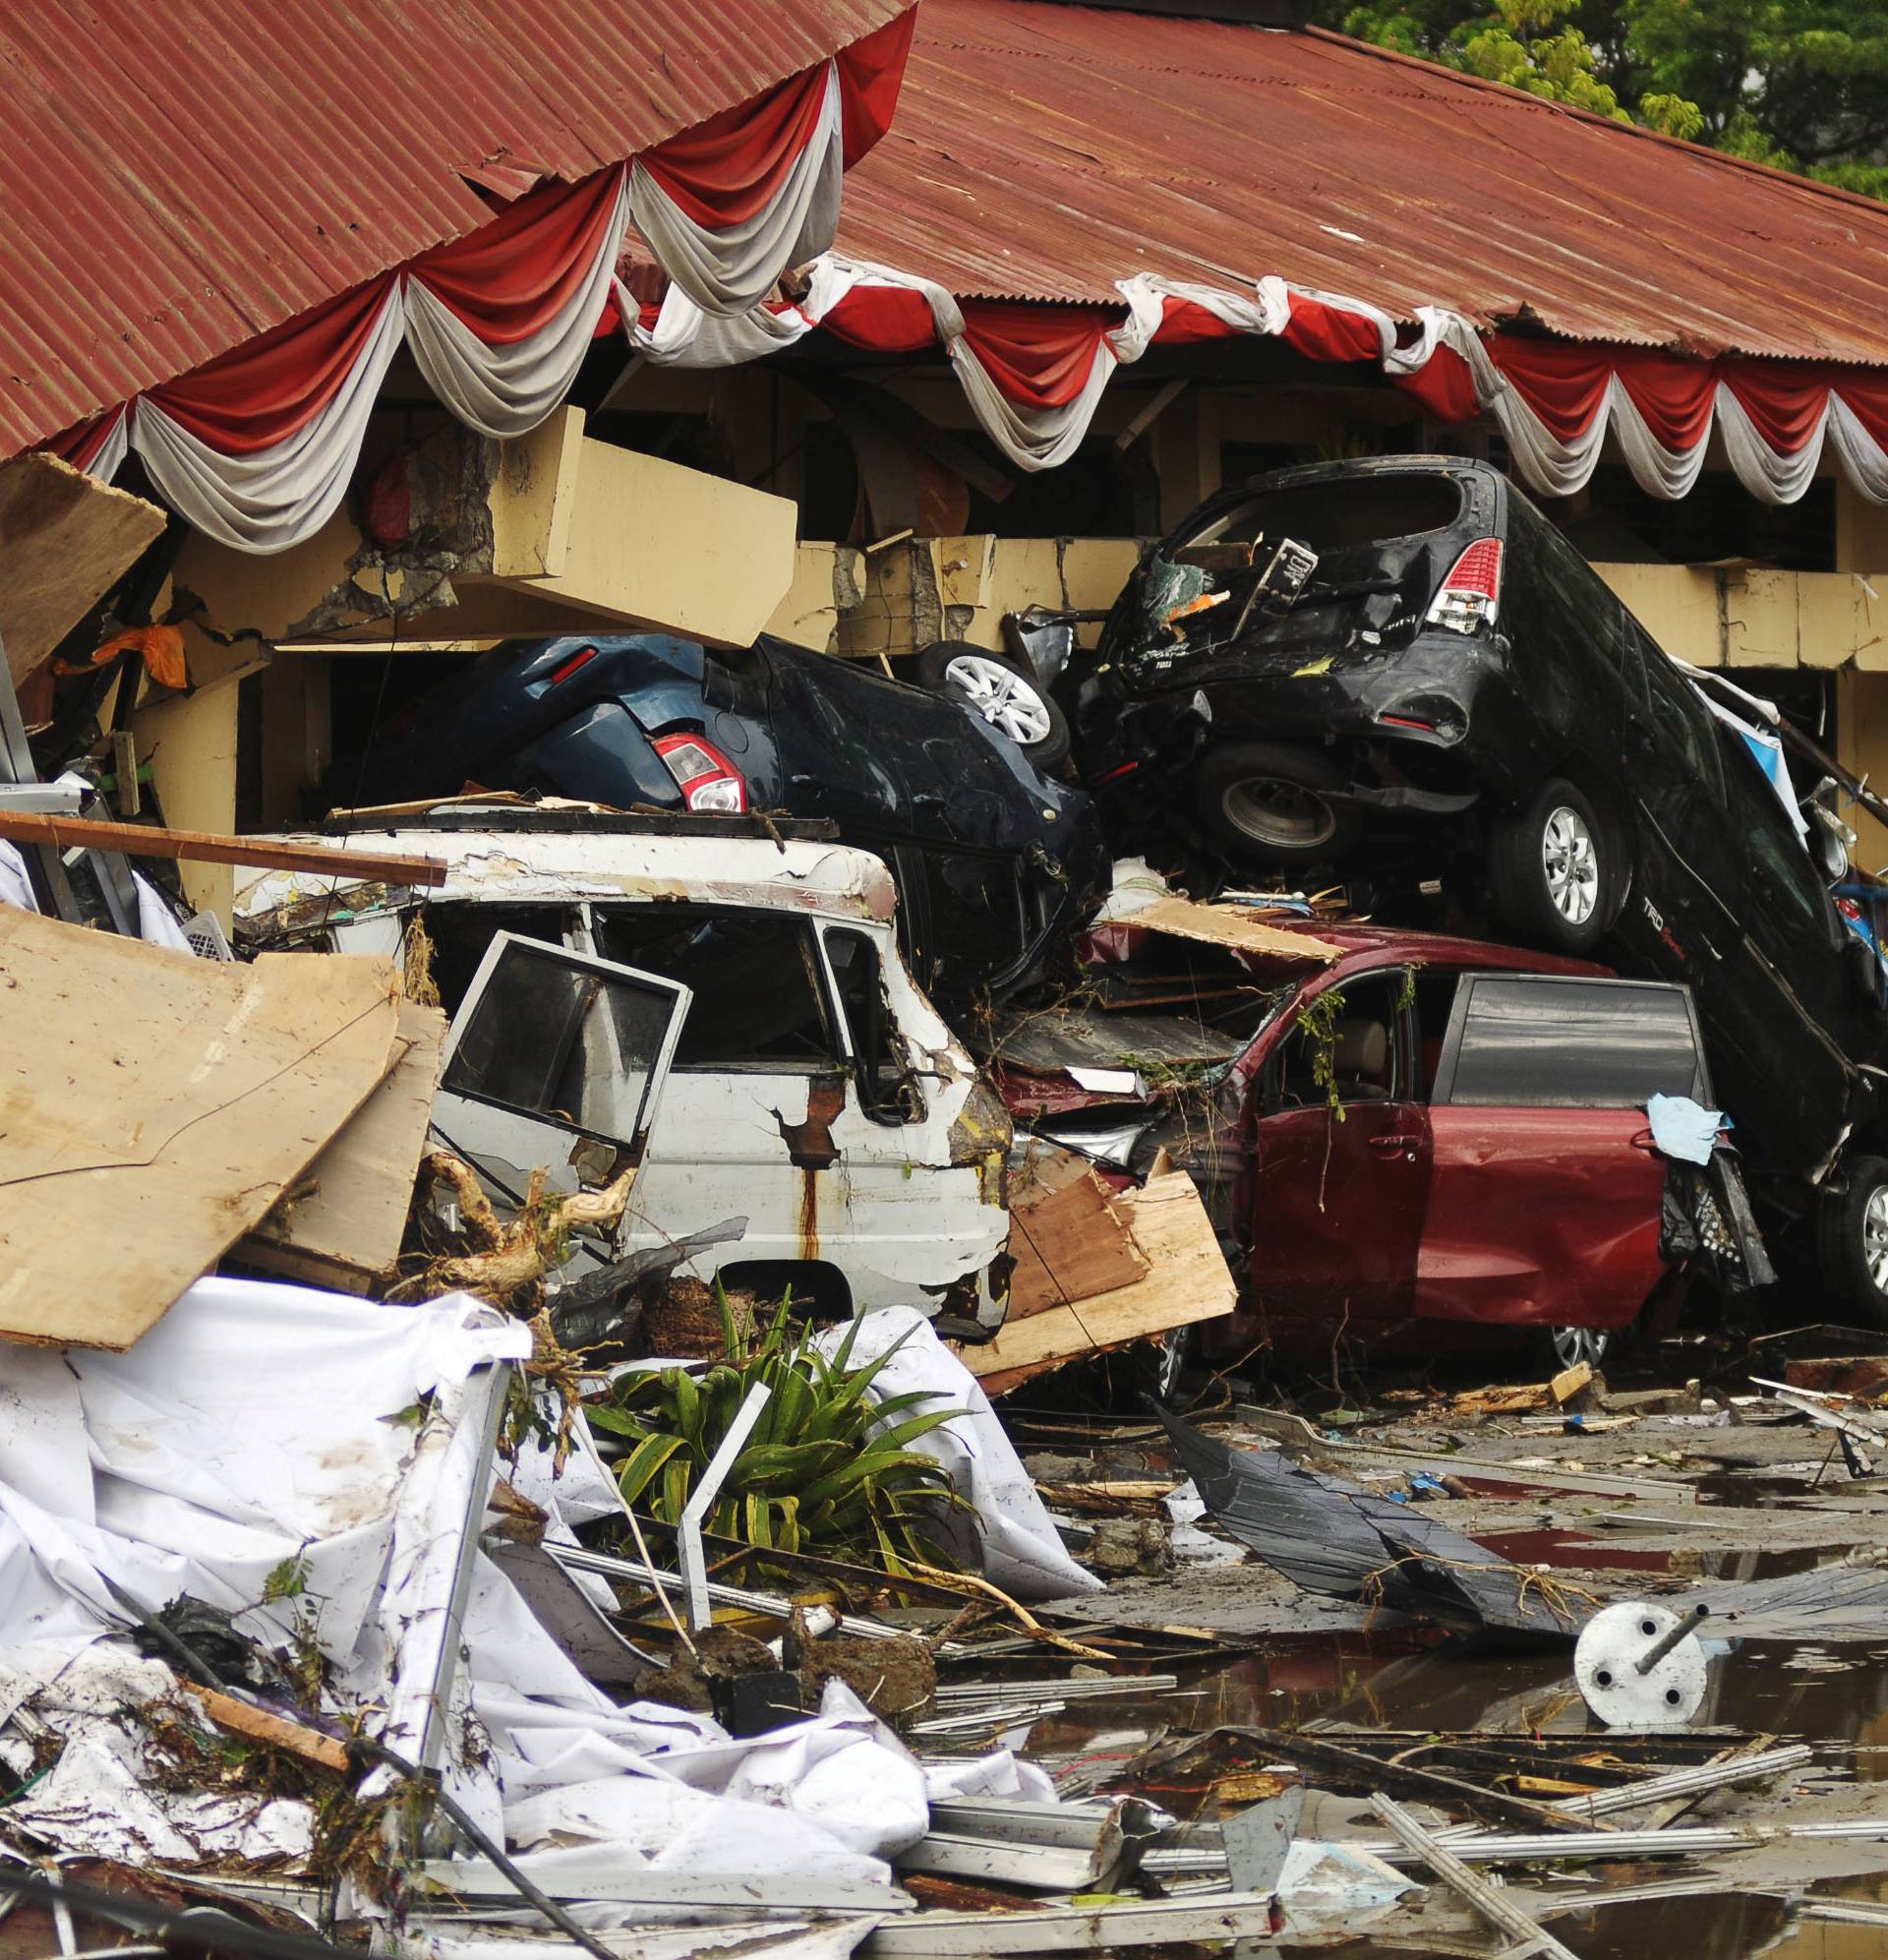 Damage from an earthquake and tsunami can be seen in Palu, Central Sulawesi